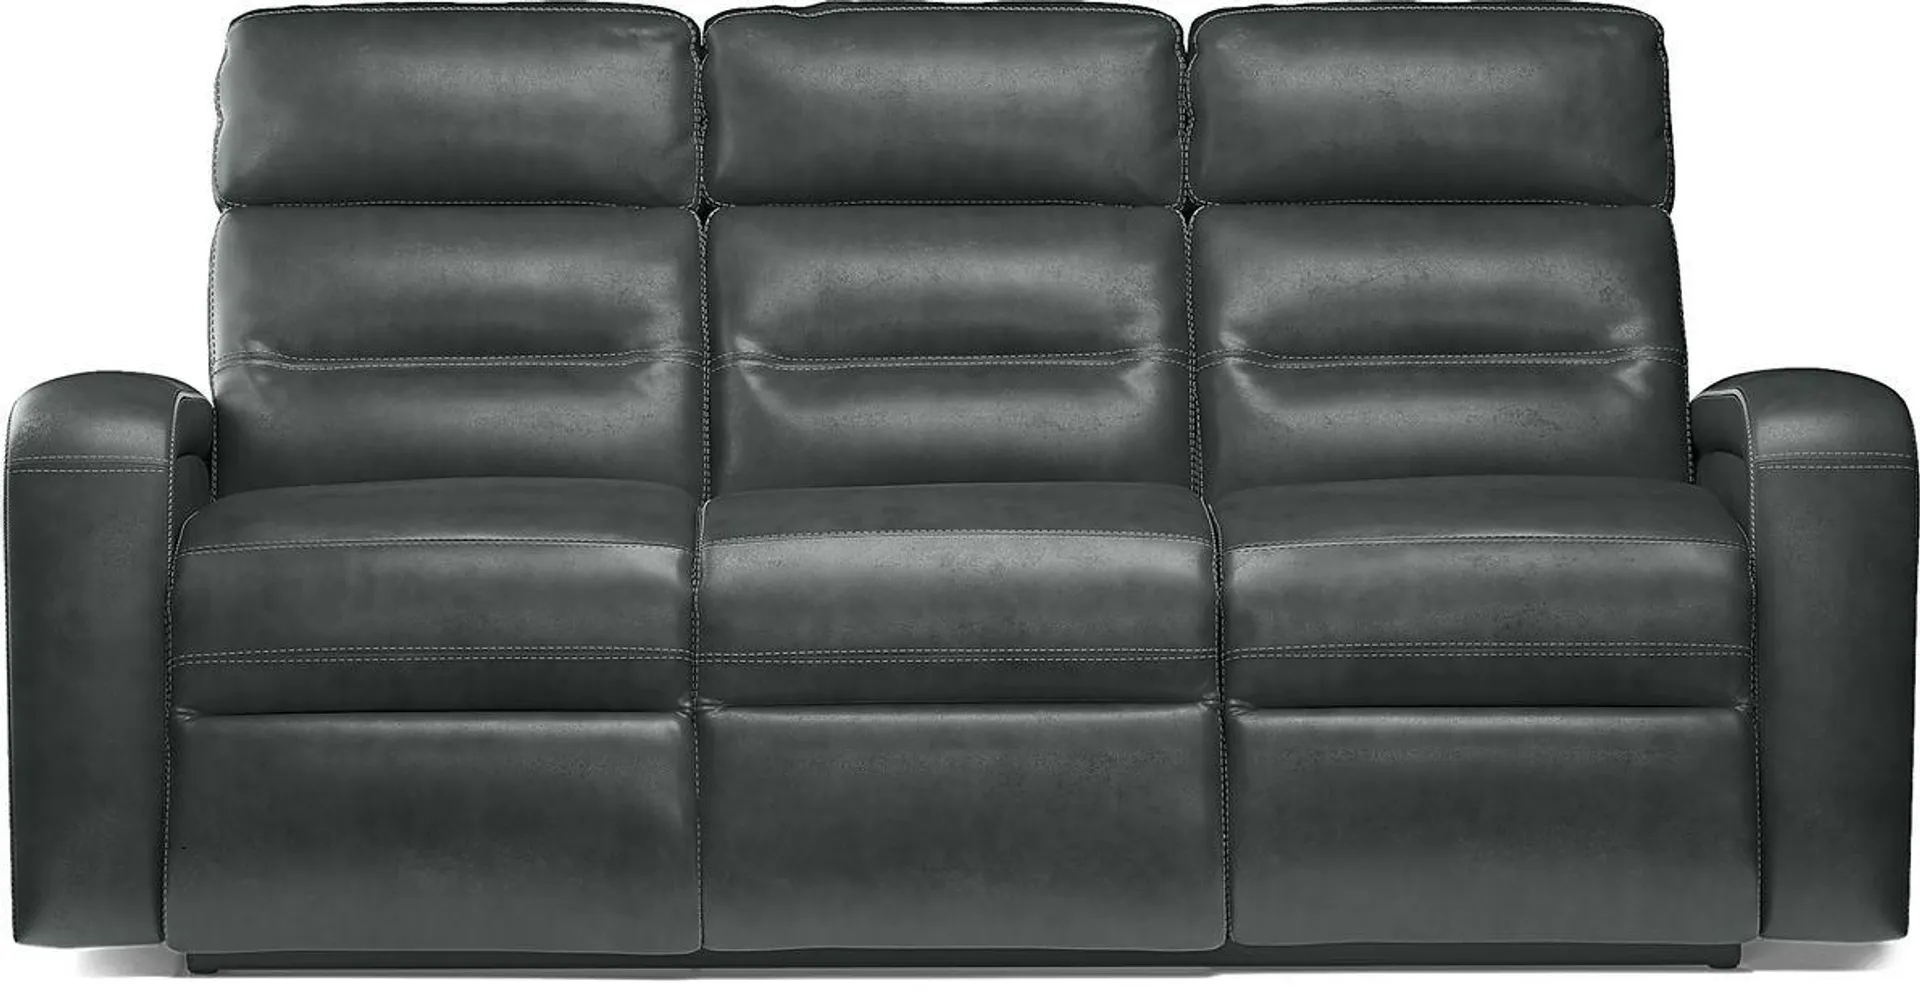 Sierra Madre Leather Non-Power Reclining Sofa